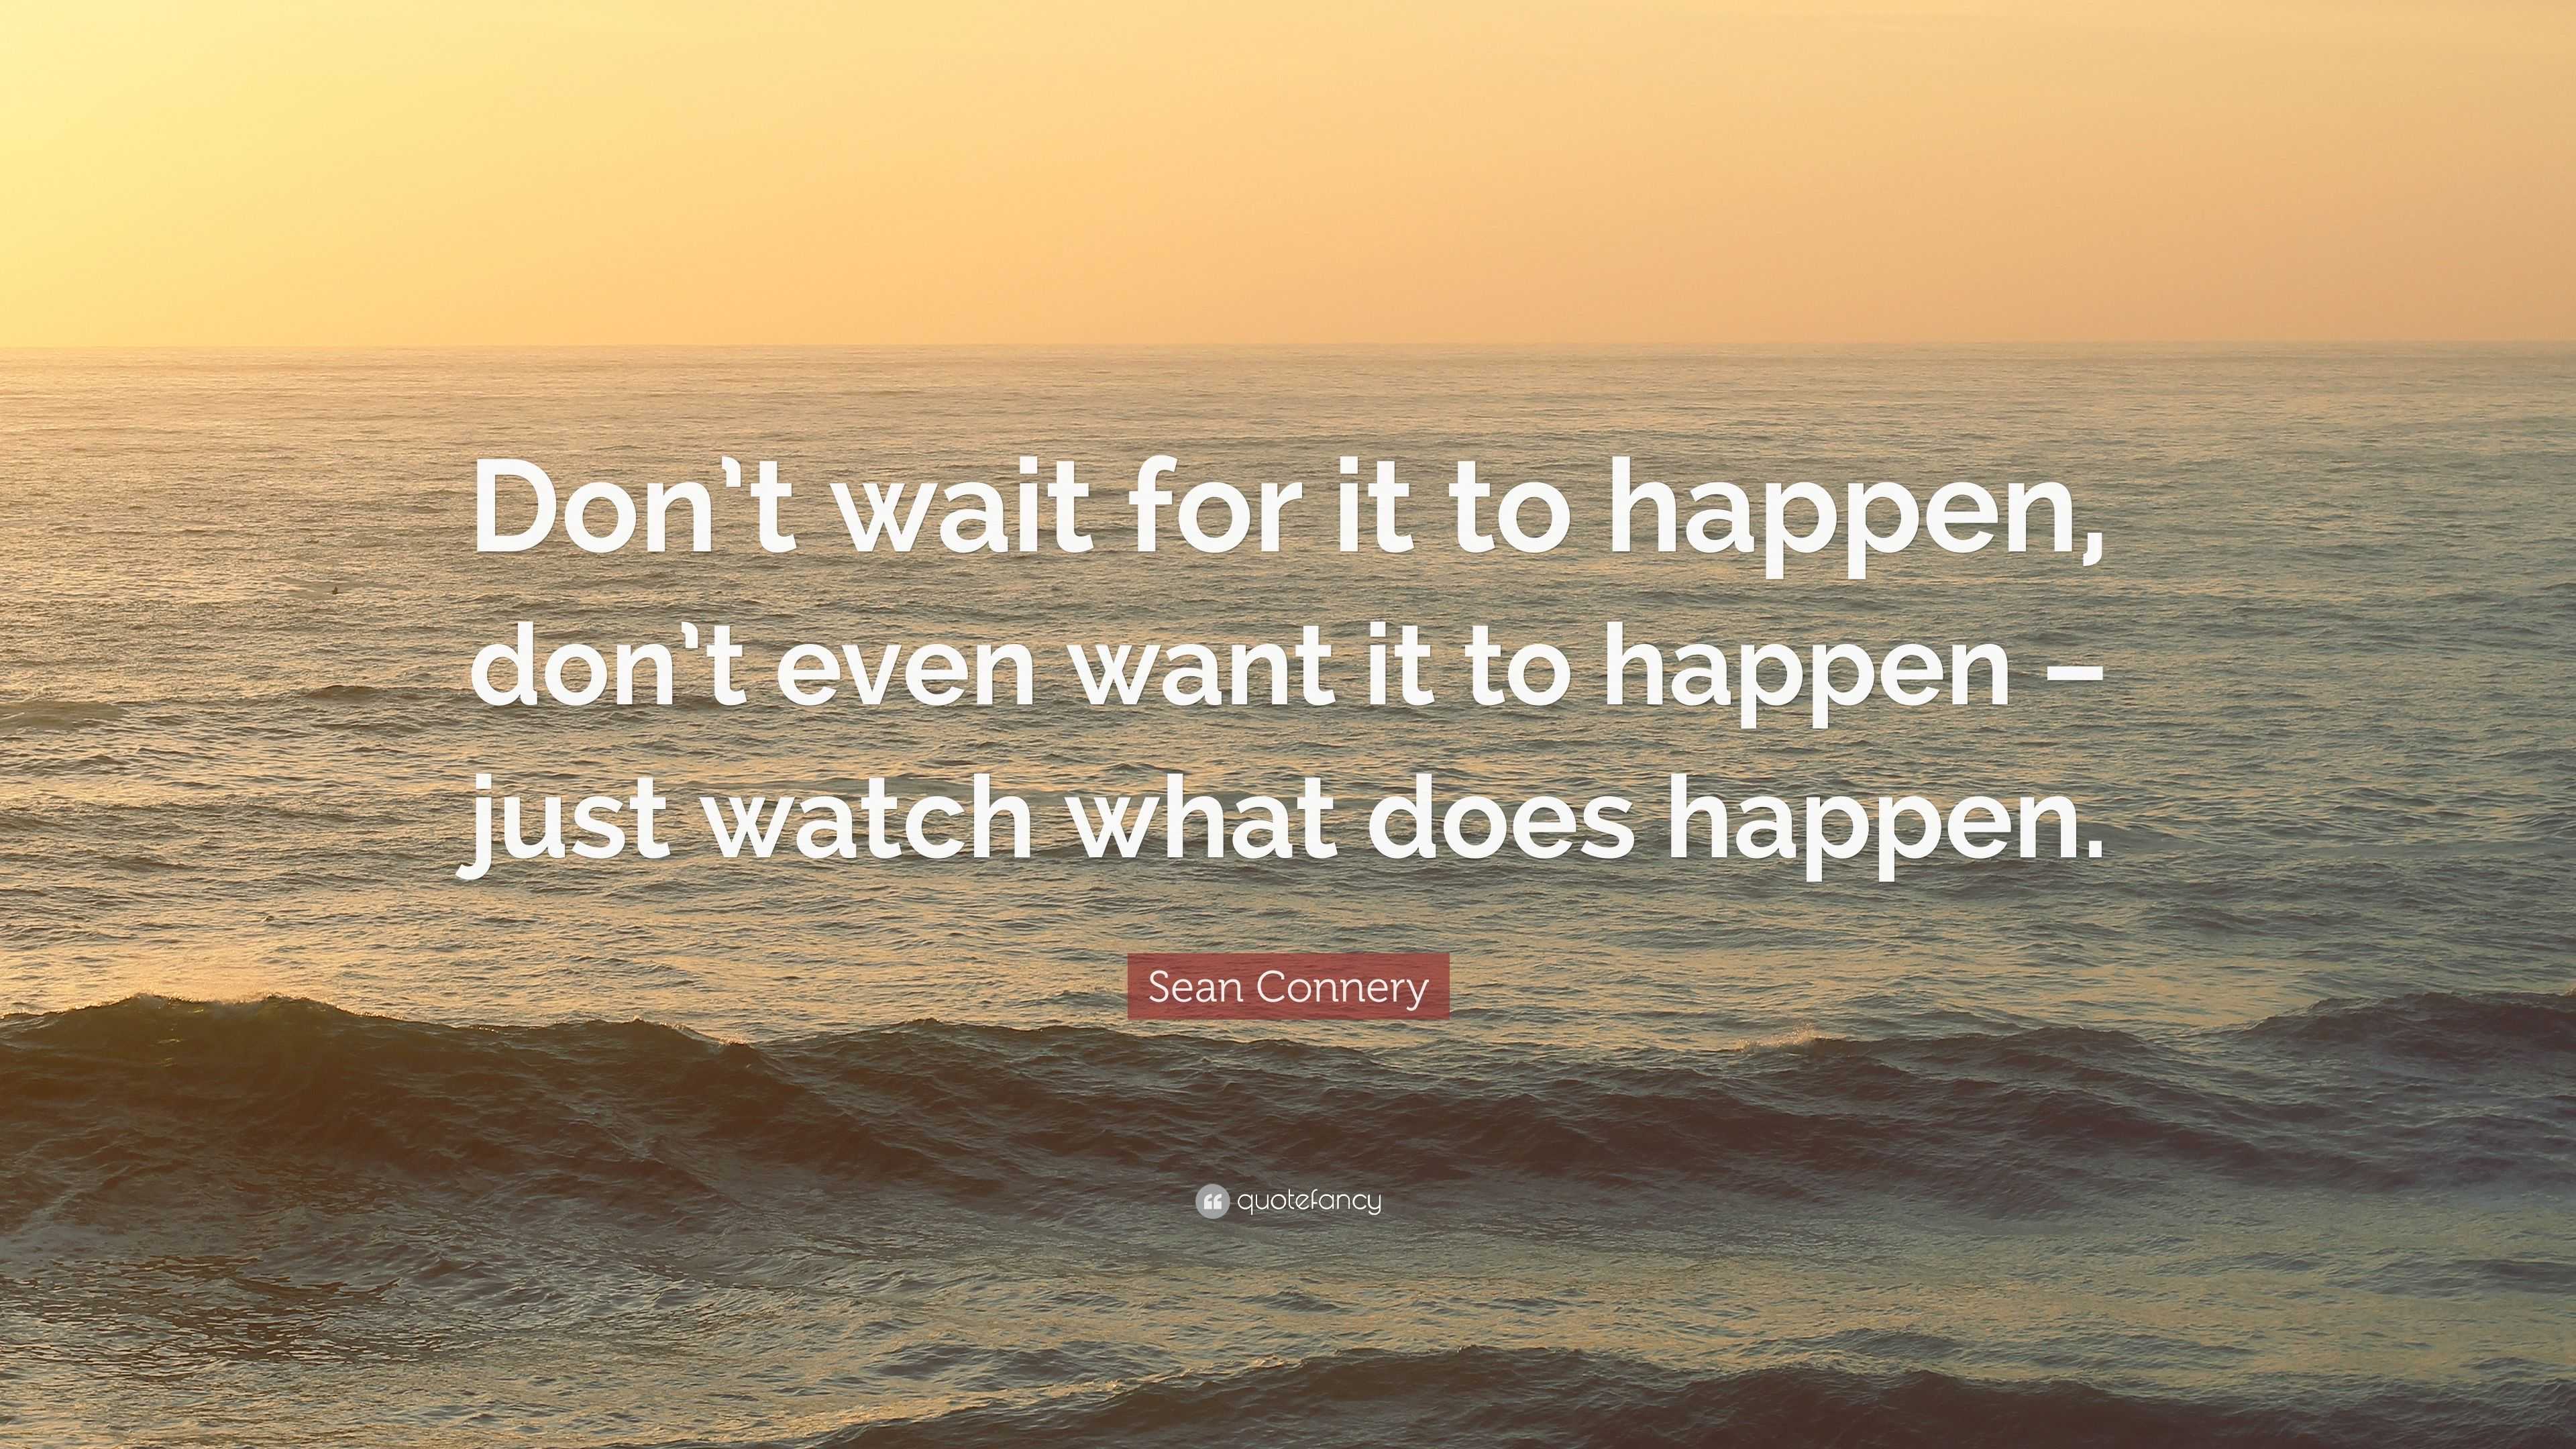 Sean Connery Quote: “Don’t wait for it to happen, don’t even want it to